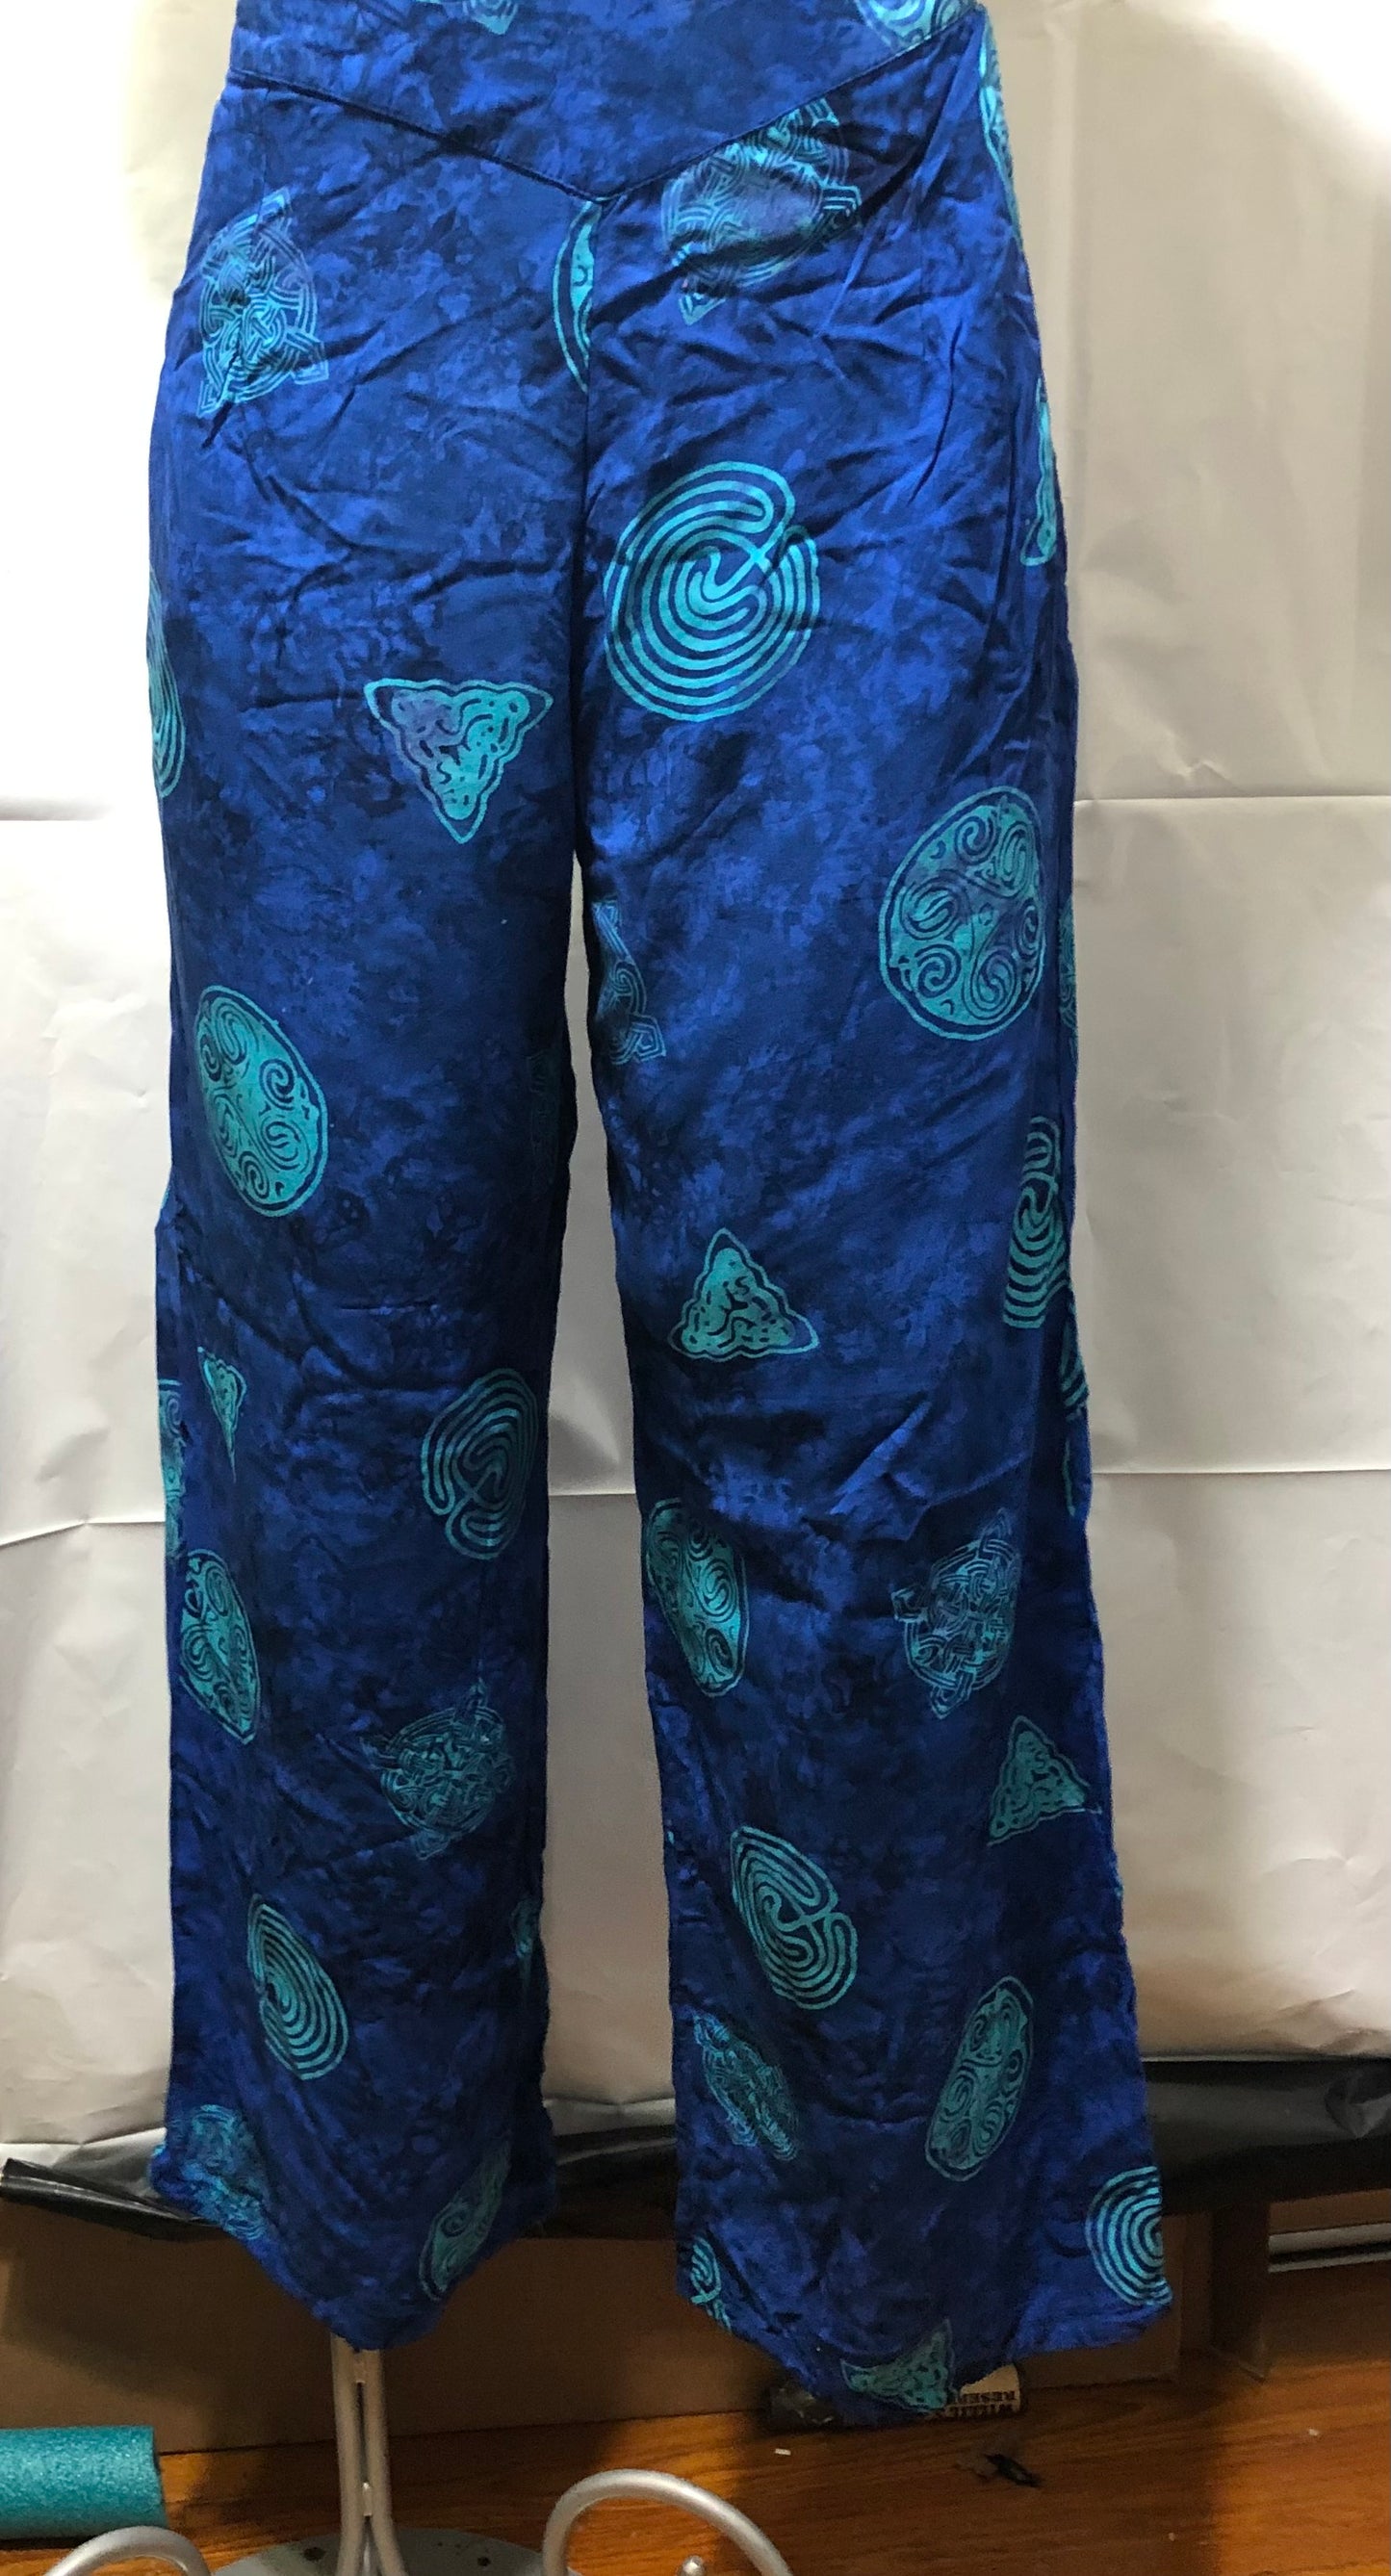 Rayon Pants with Celtic Labyrinth and Knot design- Hippie/Boho